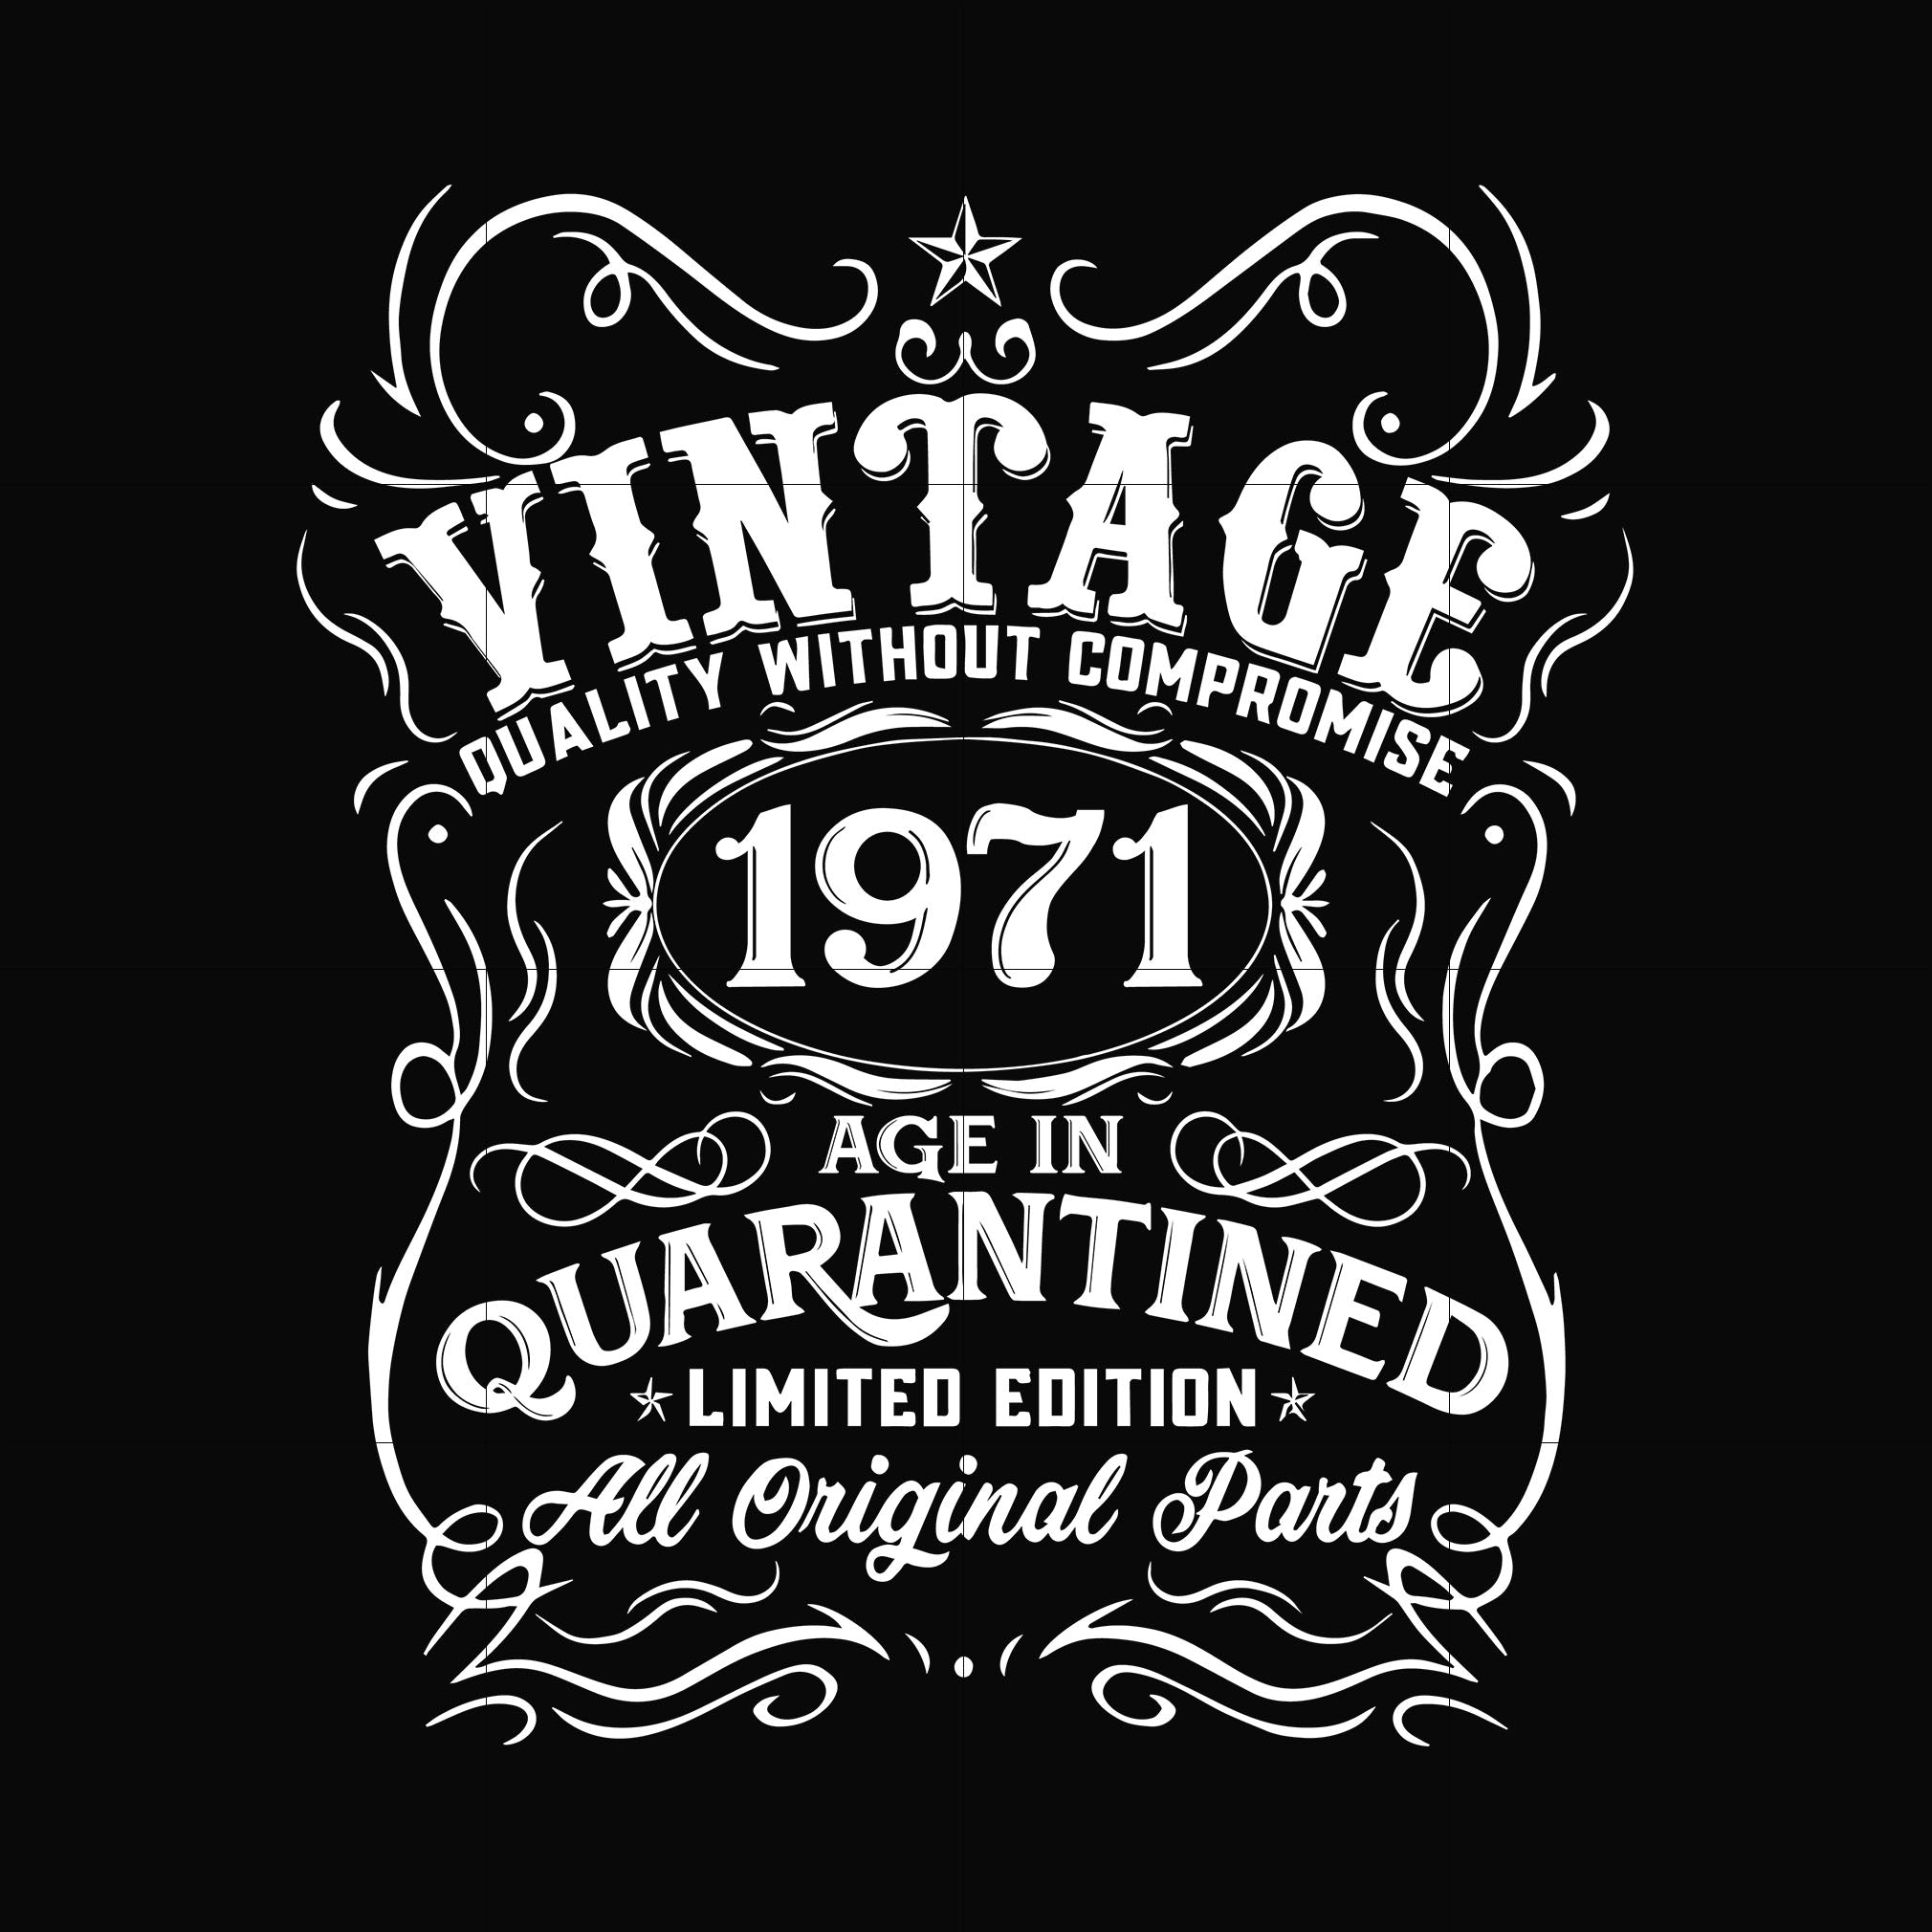 Vintage 1971 age in quarantined limited edition svg, limited edition s